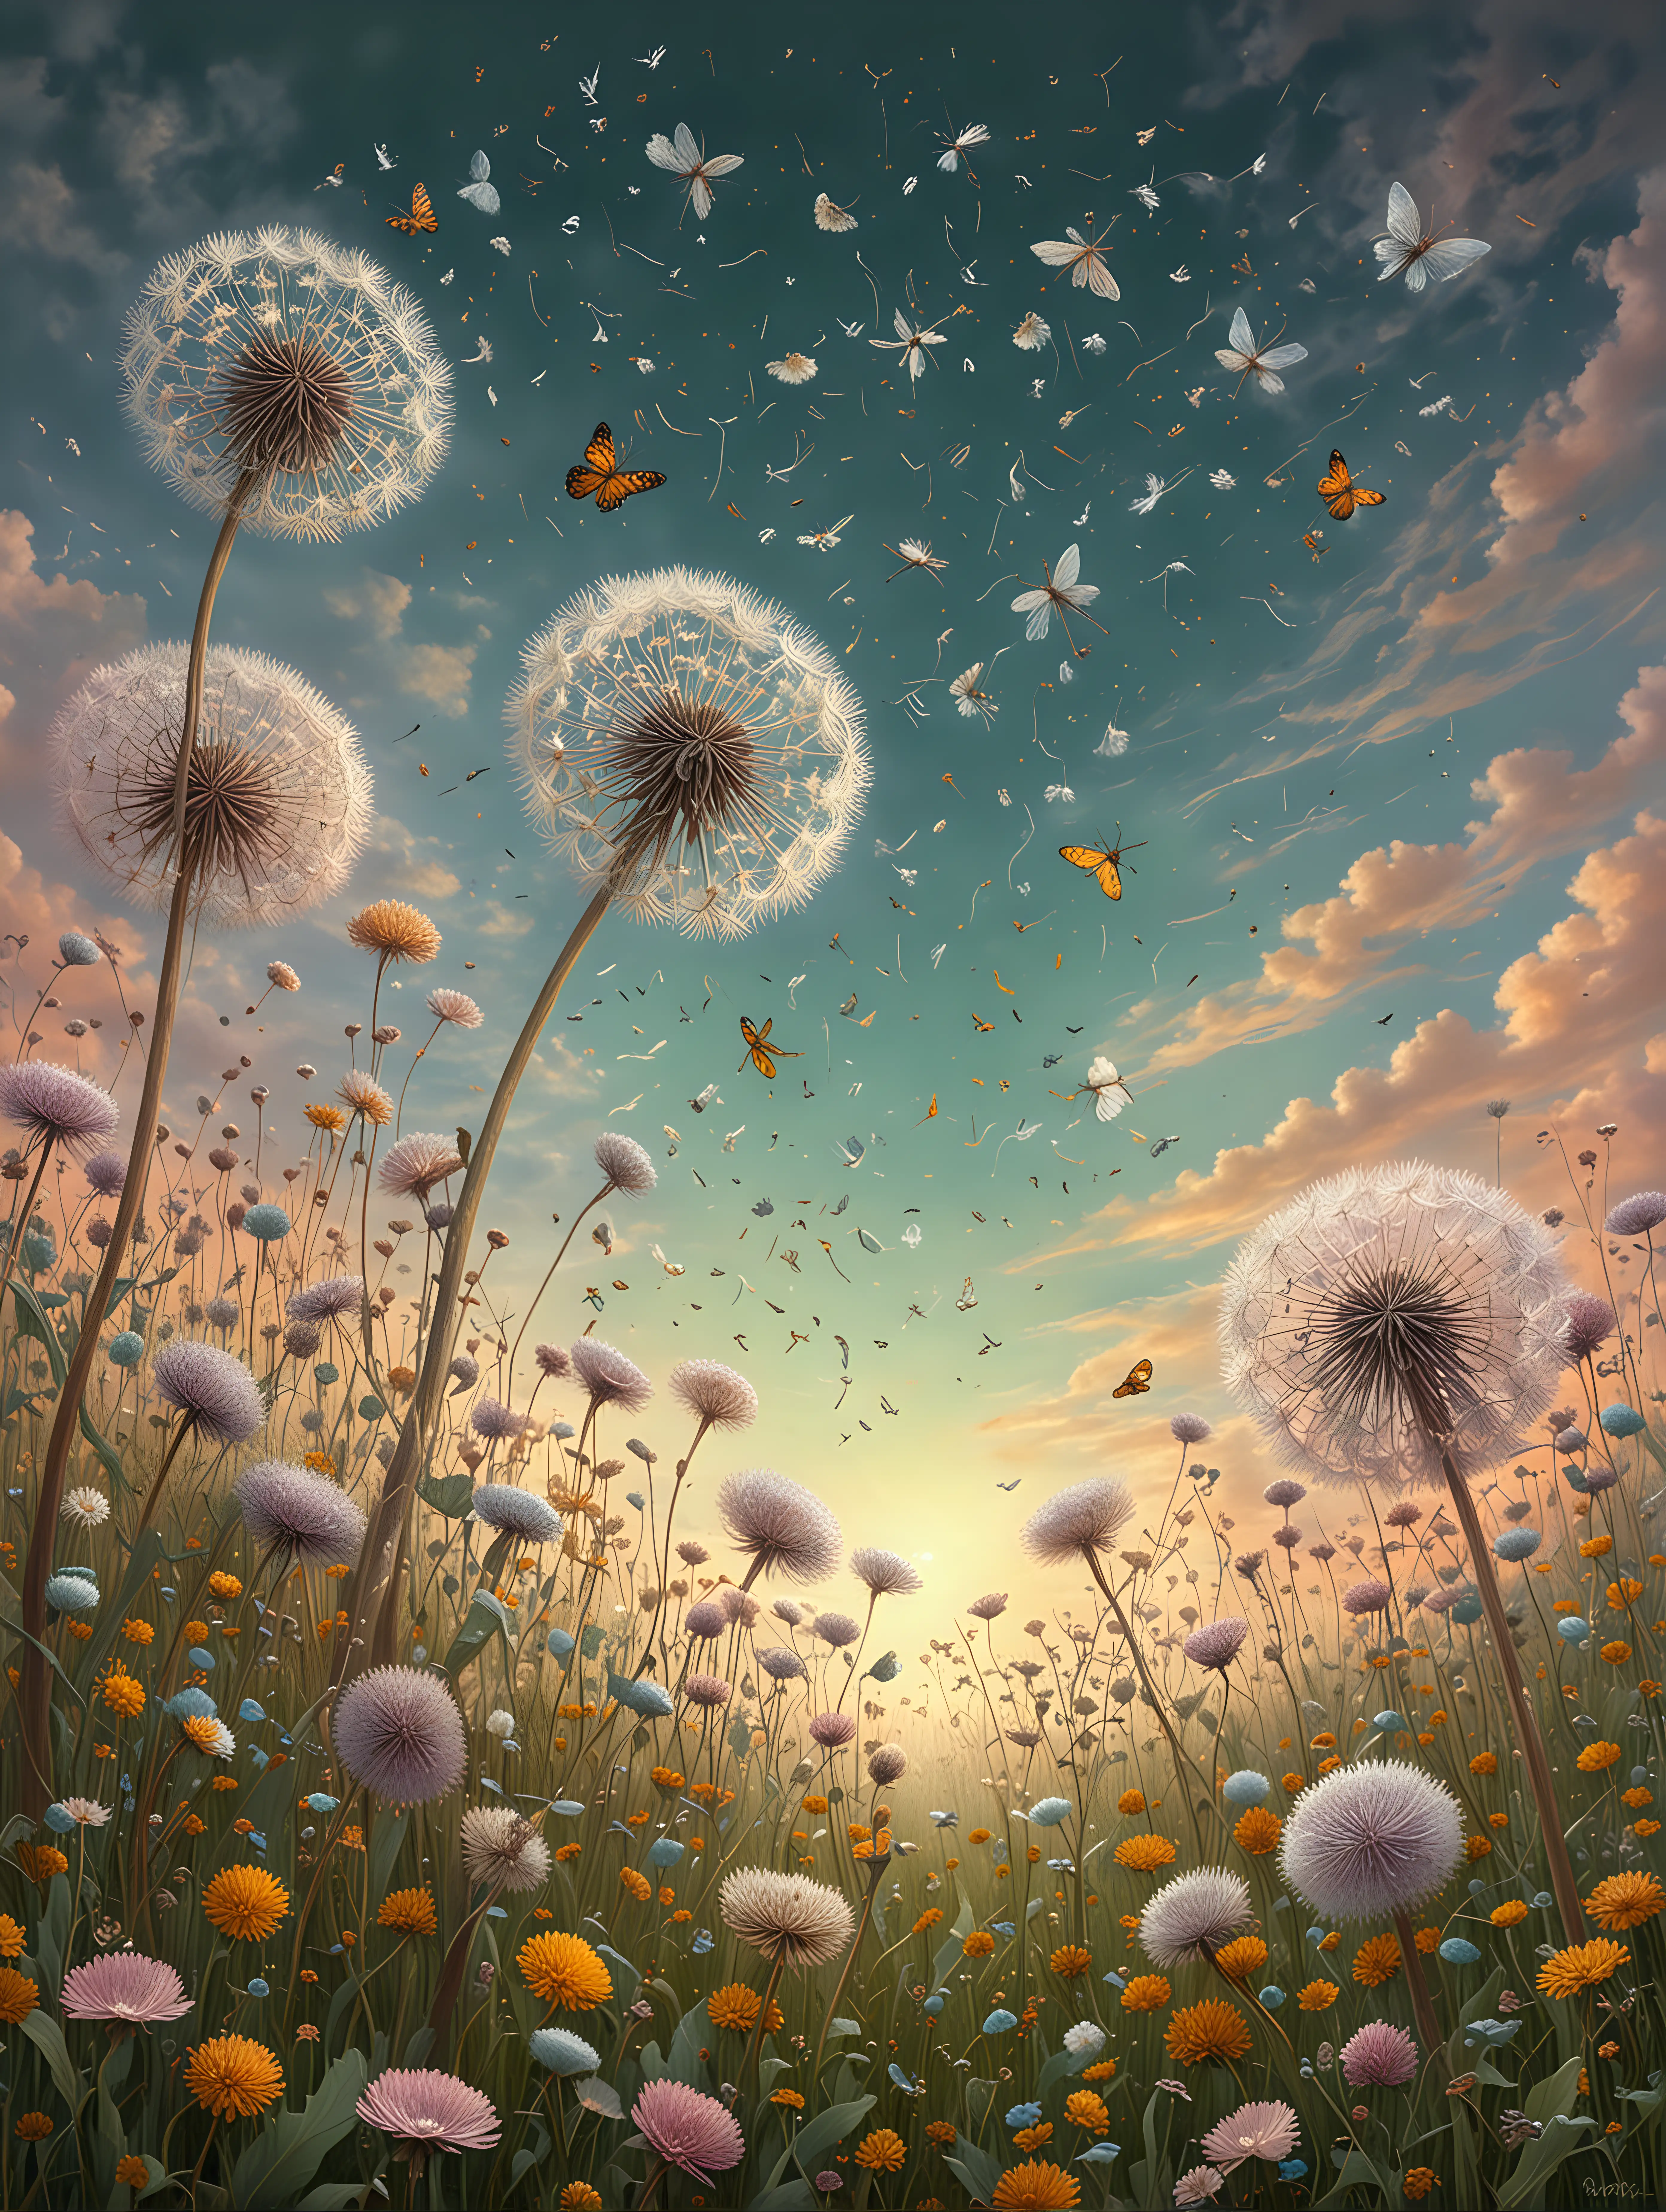 field of fluffy dandelions, sky, pastel colors, vintage, kerem beyit, by Daniel Merriam, esao andrews, ornate, by Kerembeyit, inspired by Daniel Merriam, by Jan Kip, fire flies, dragonfly, butterfly, bee, daniel merriam, mystical insects, highly detailed digital artwork, antique, vintage, dusty, and rugged illustration